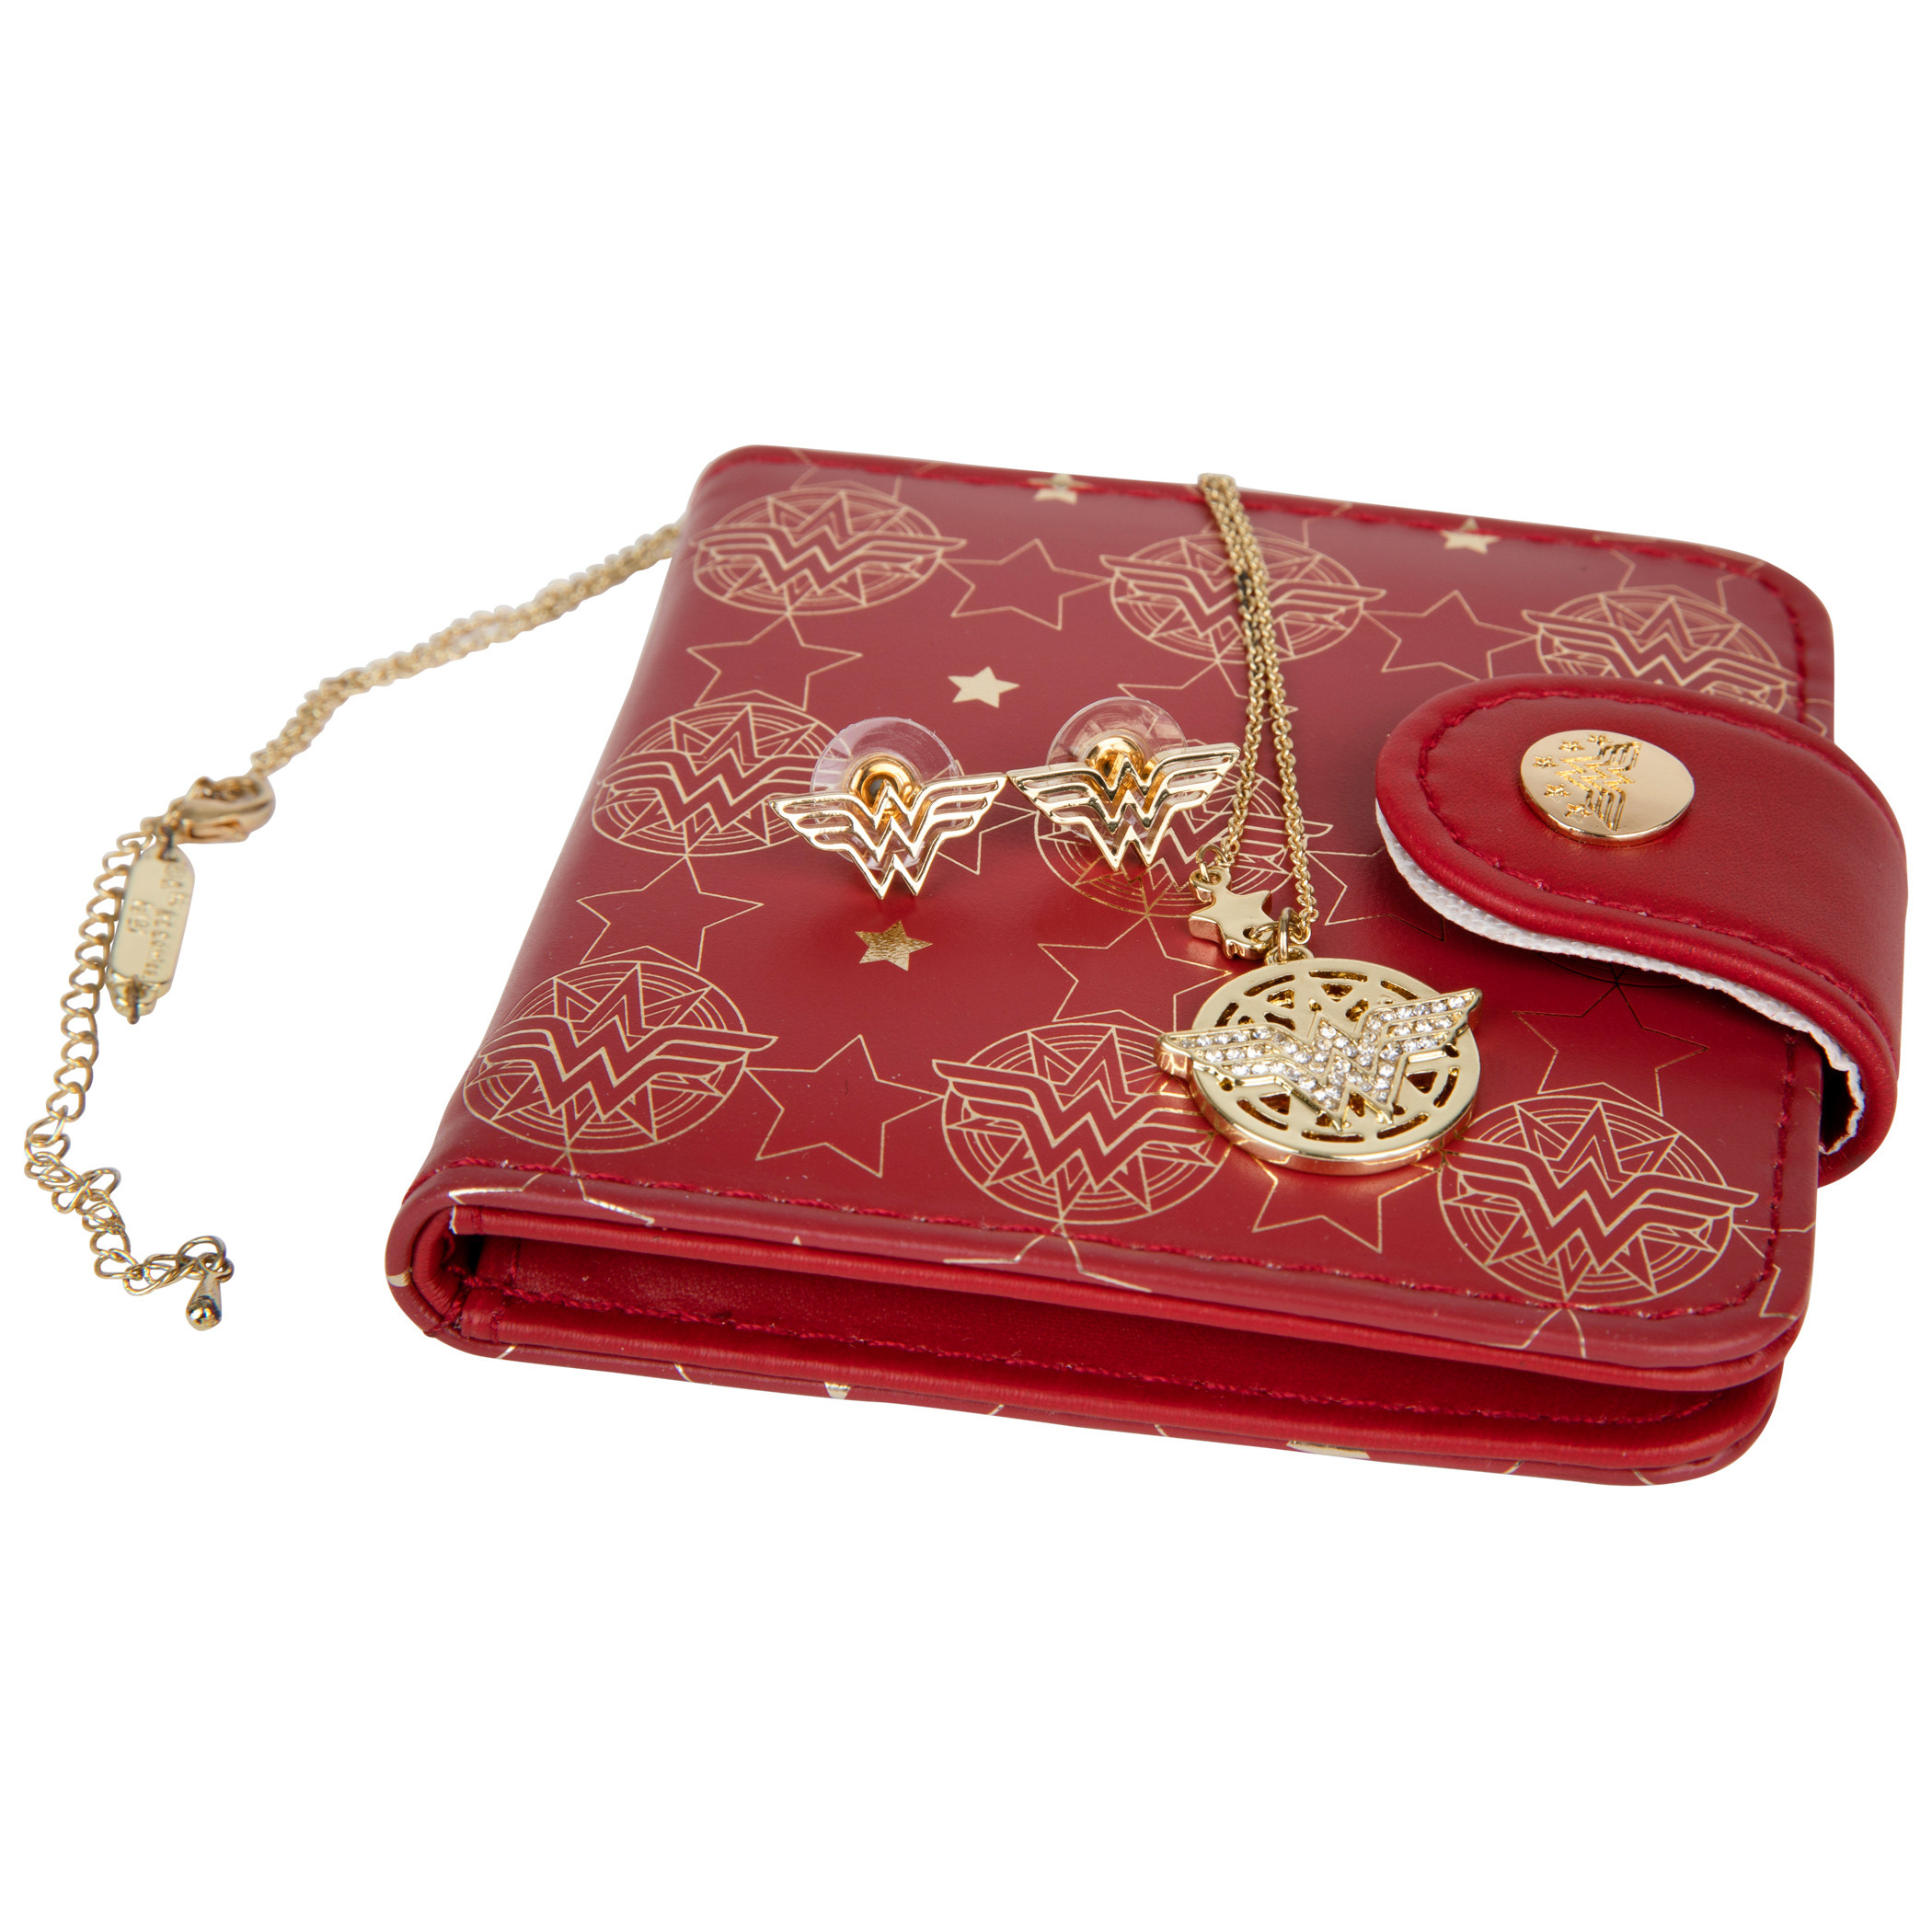 Wonder Woman Symbol Necklace, Earrings, and Wallet Set